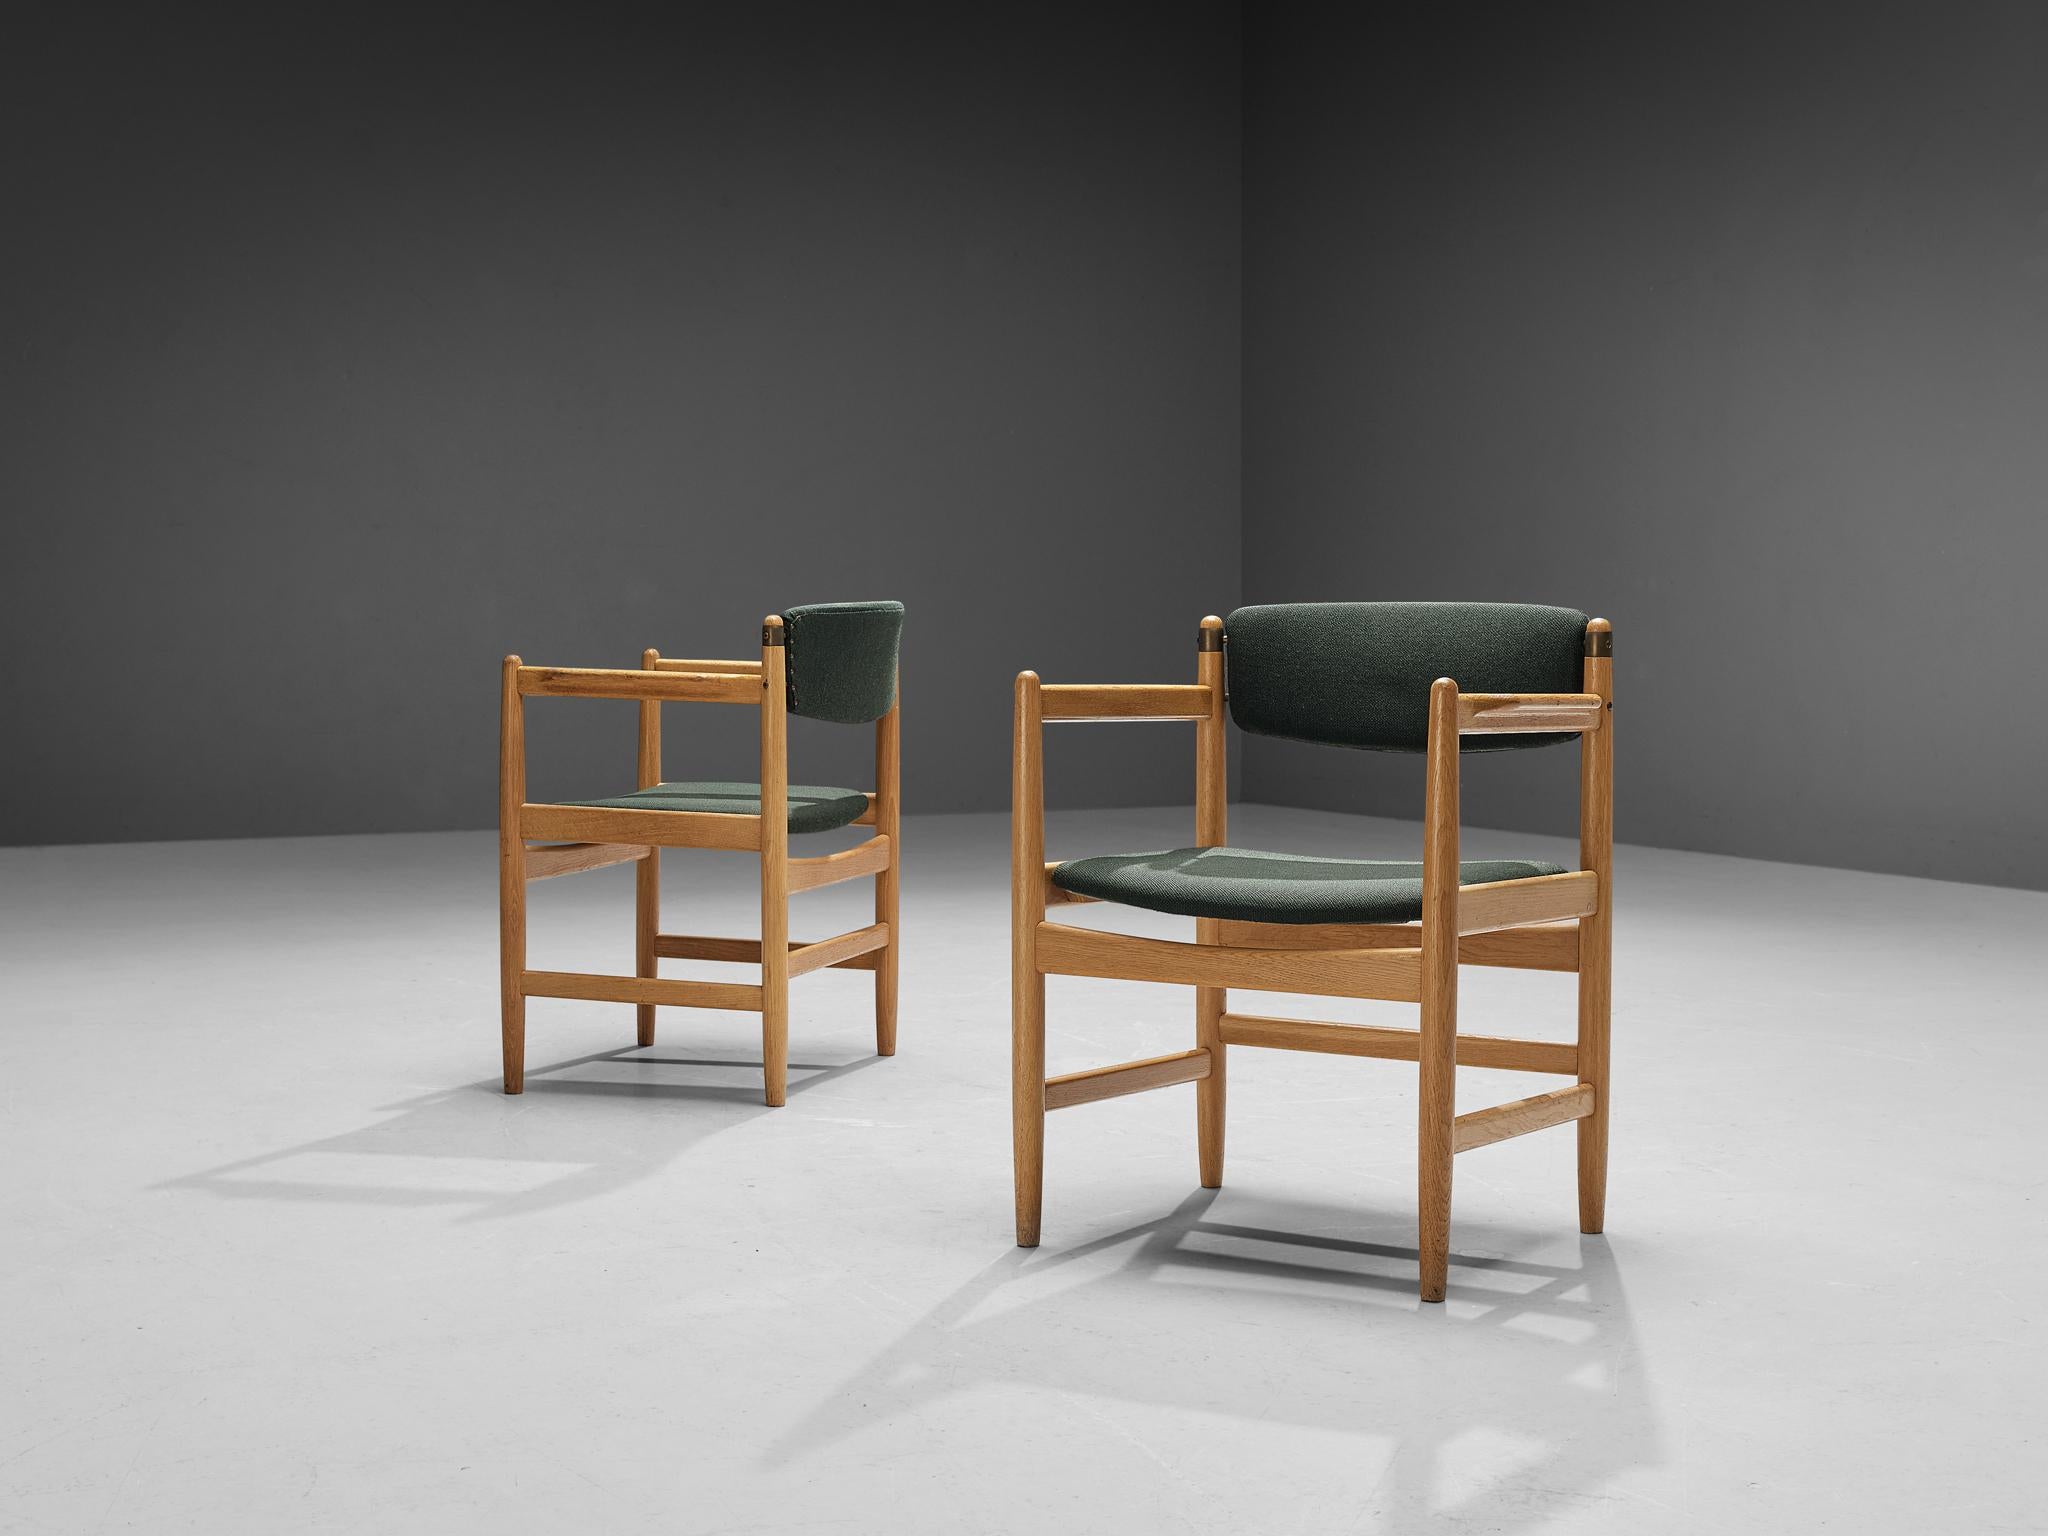 Pair of armchairs, fabric, oak, brass, Denmark, 1960s

This well-executed Danish pair of armchairs shows an exquisite level of craftsmanship. The chair features a sculpted frame that is typical for Mid-Century Scandinavian Modern design. The